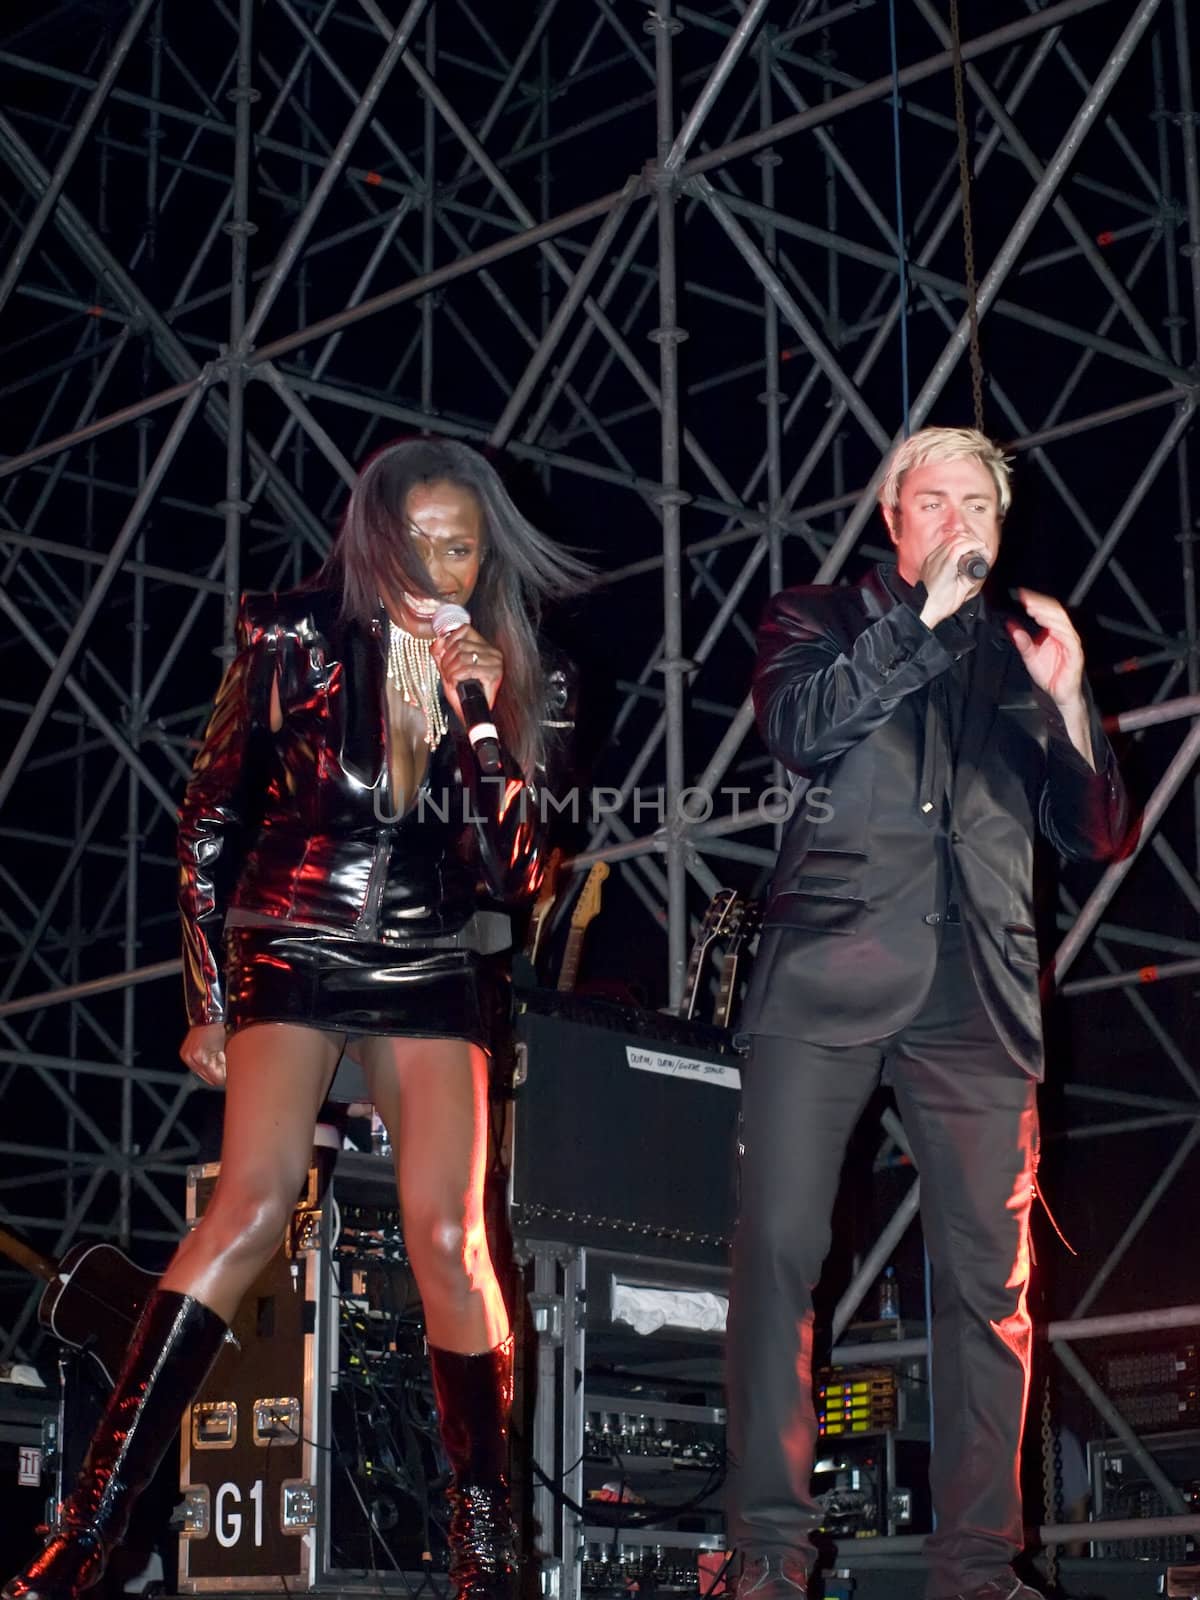 Duran Duran frontman and vocalist Simon Le Bon and backing vocalist Anna Ross live on stage in Malta on 26th July 2008 during Red Carpet Massacre Tour